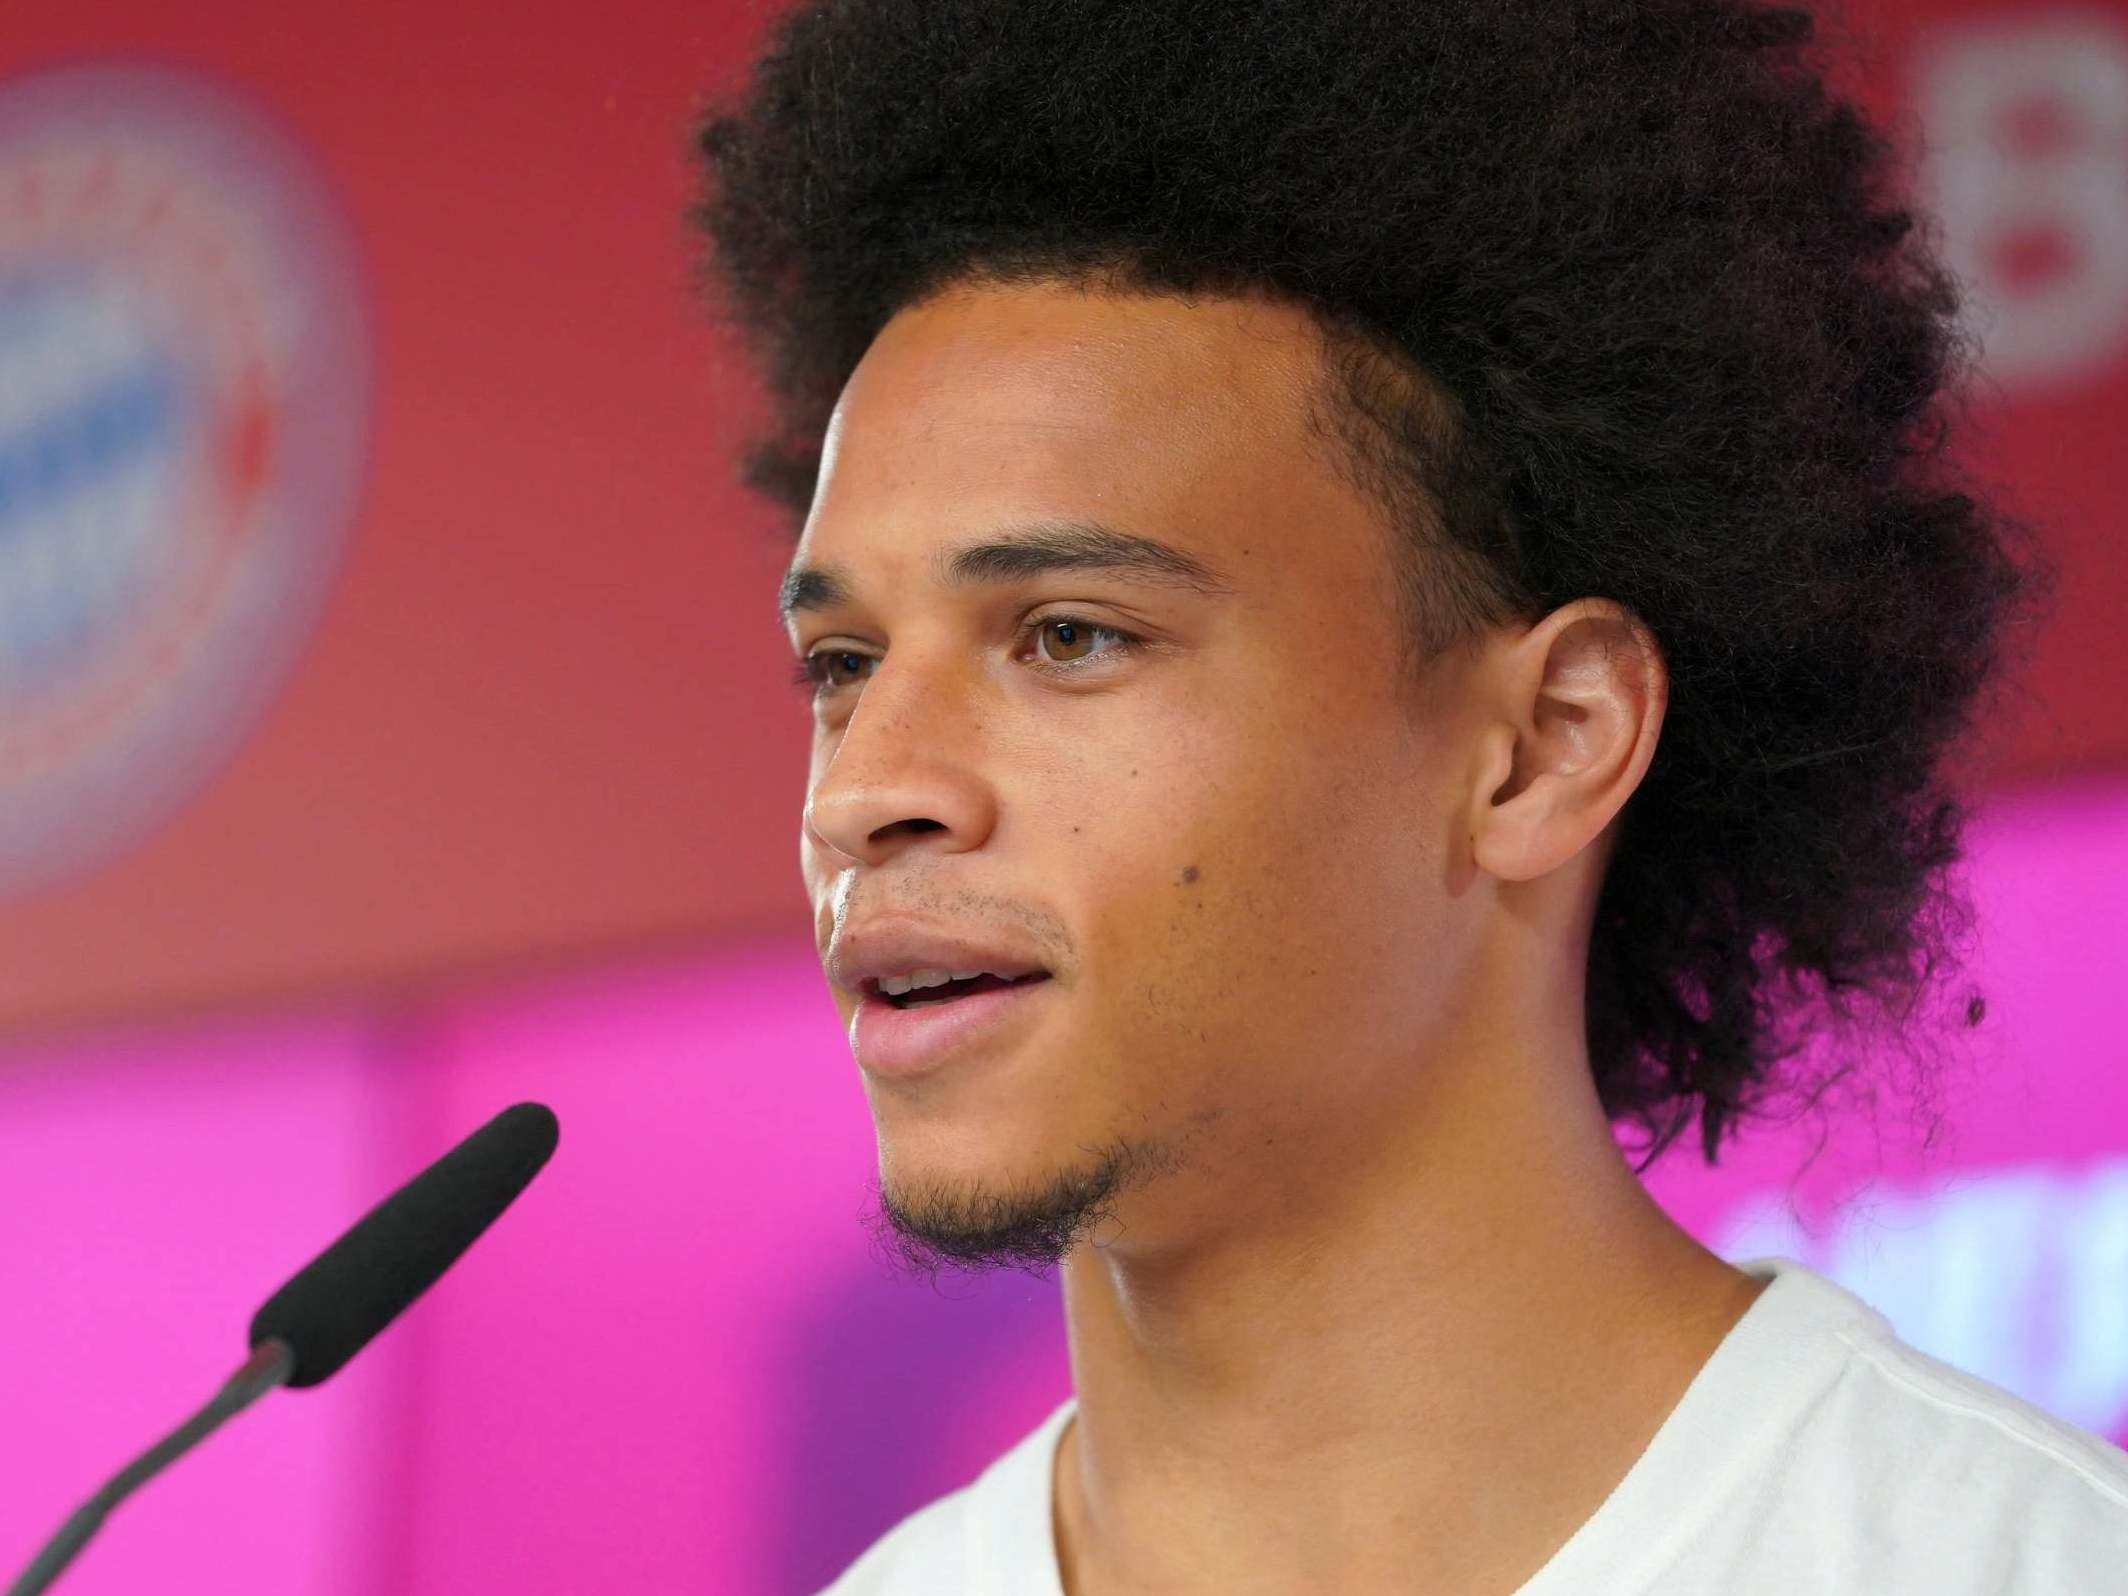 Bayern Munich unveil Leroy Sane after his transfer from Manchester City